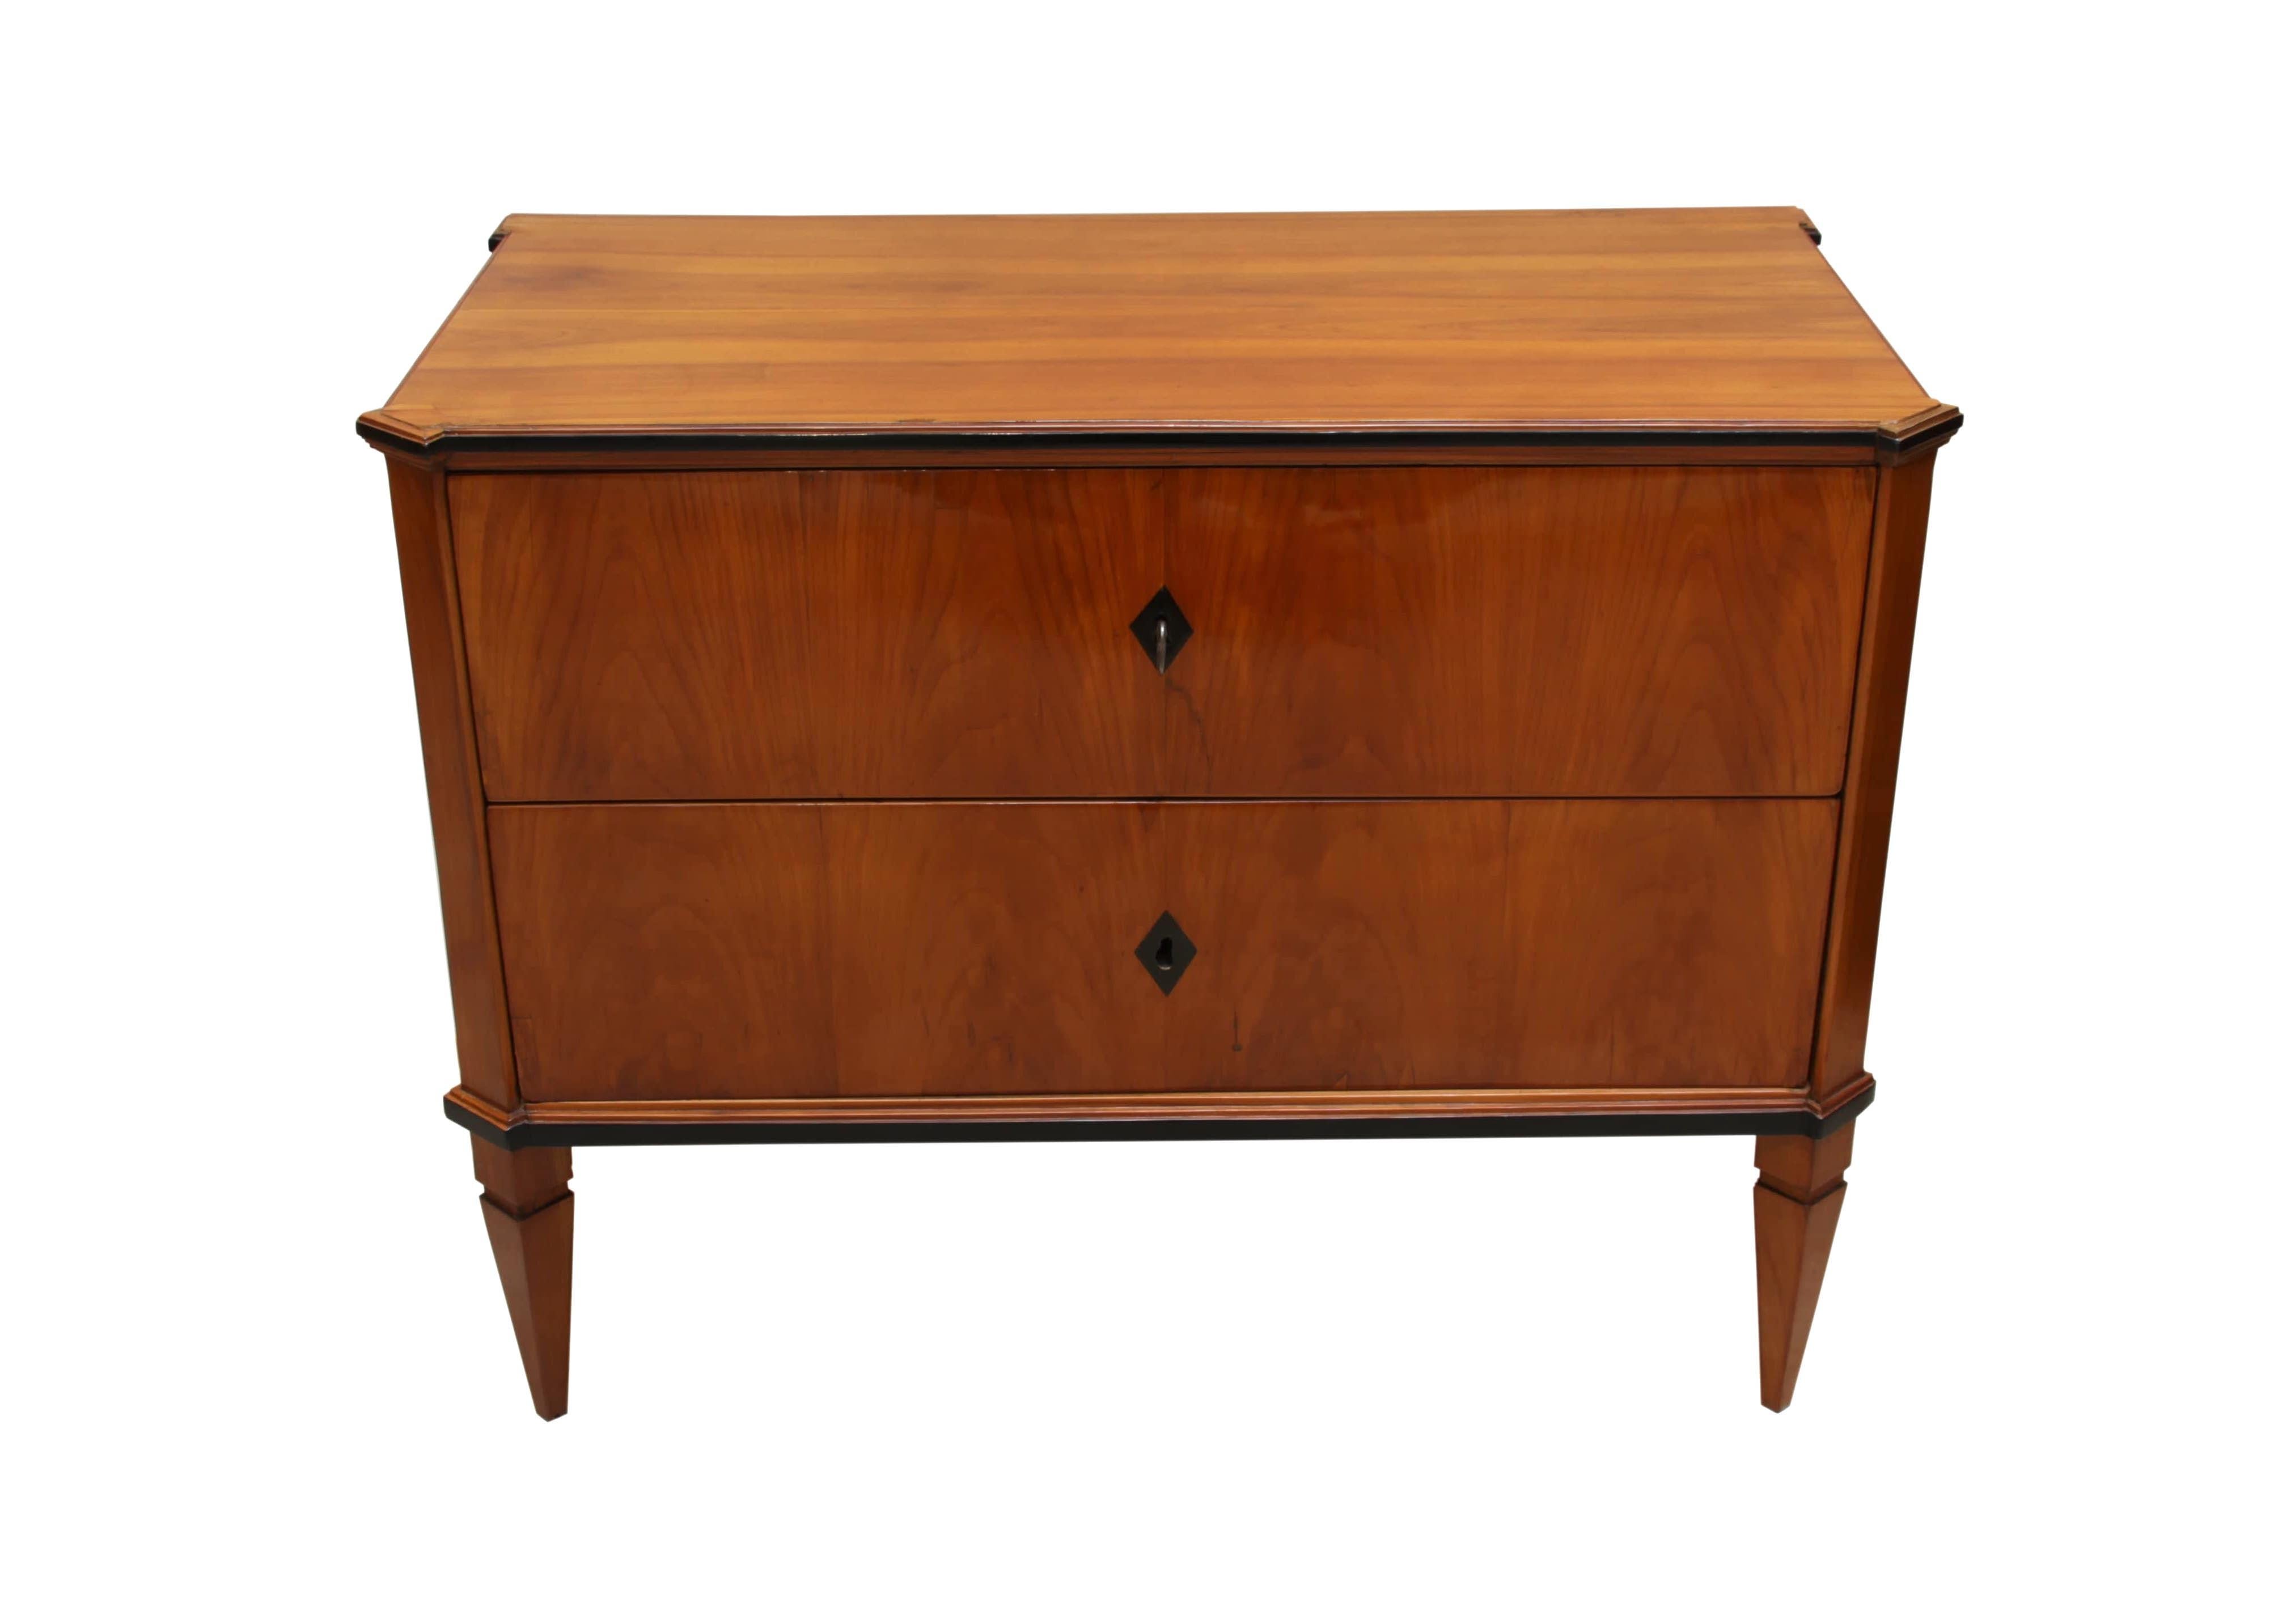 Very beautiful petite, early Biedermeier commode/chest of drawers from South Germany around 1820.

The small size of this two-doored chest of drawers makes it rare. The front, top and sides are veneered with cherry, while the other parts are cheery